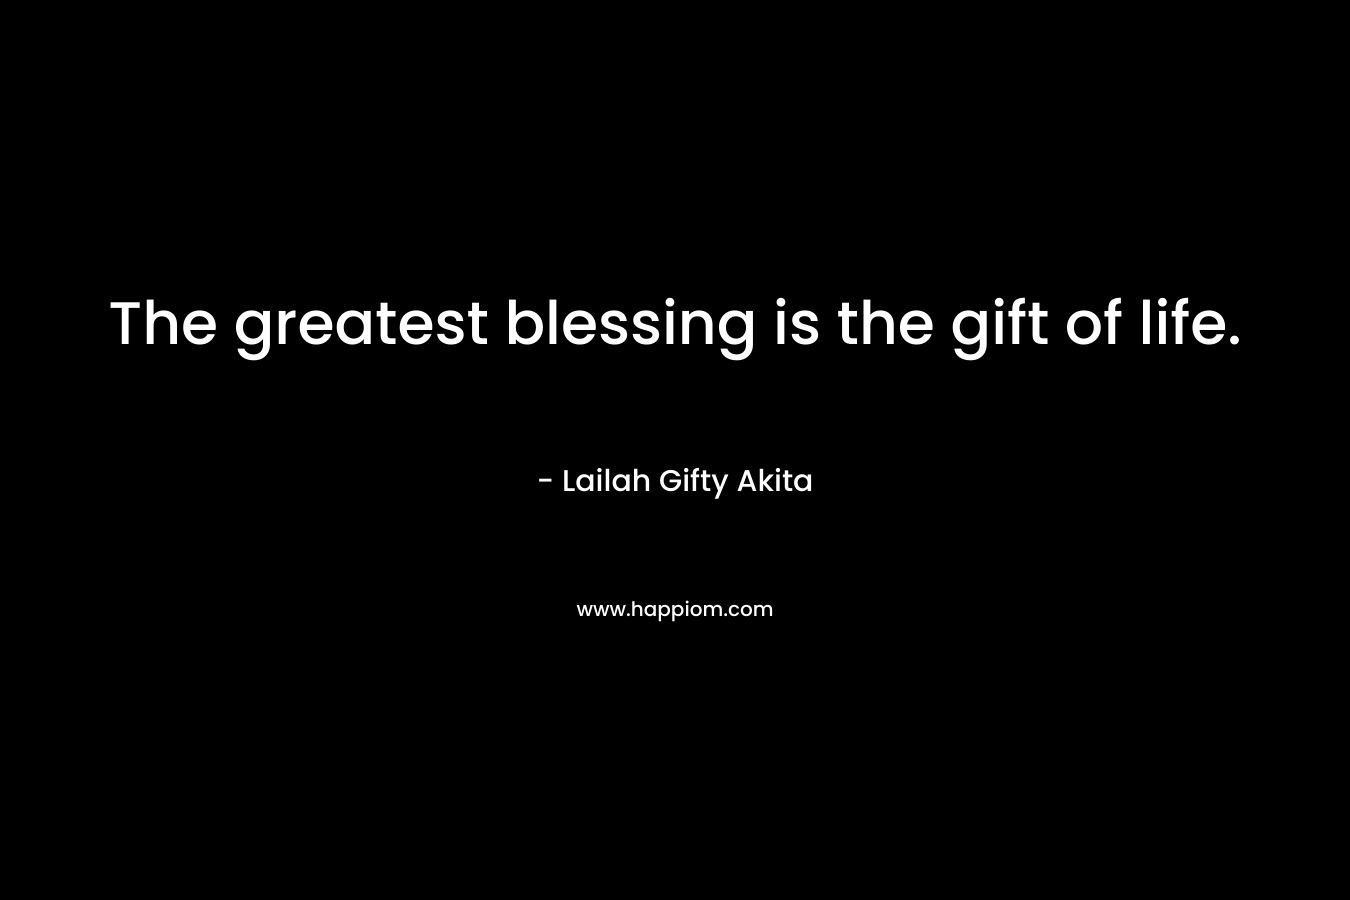 The greatest blessing is the gift of life.